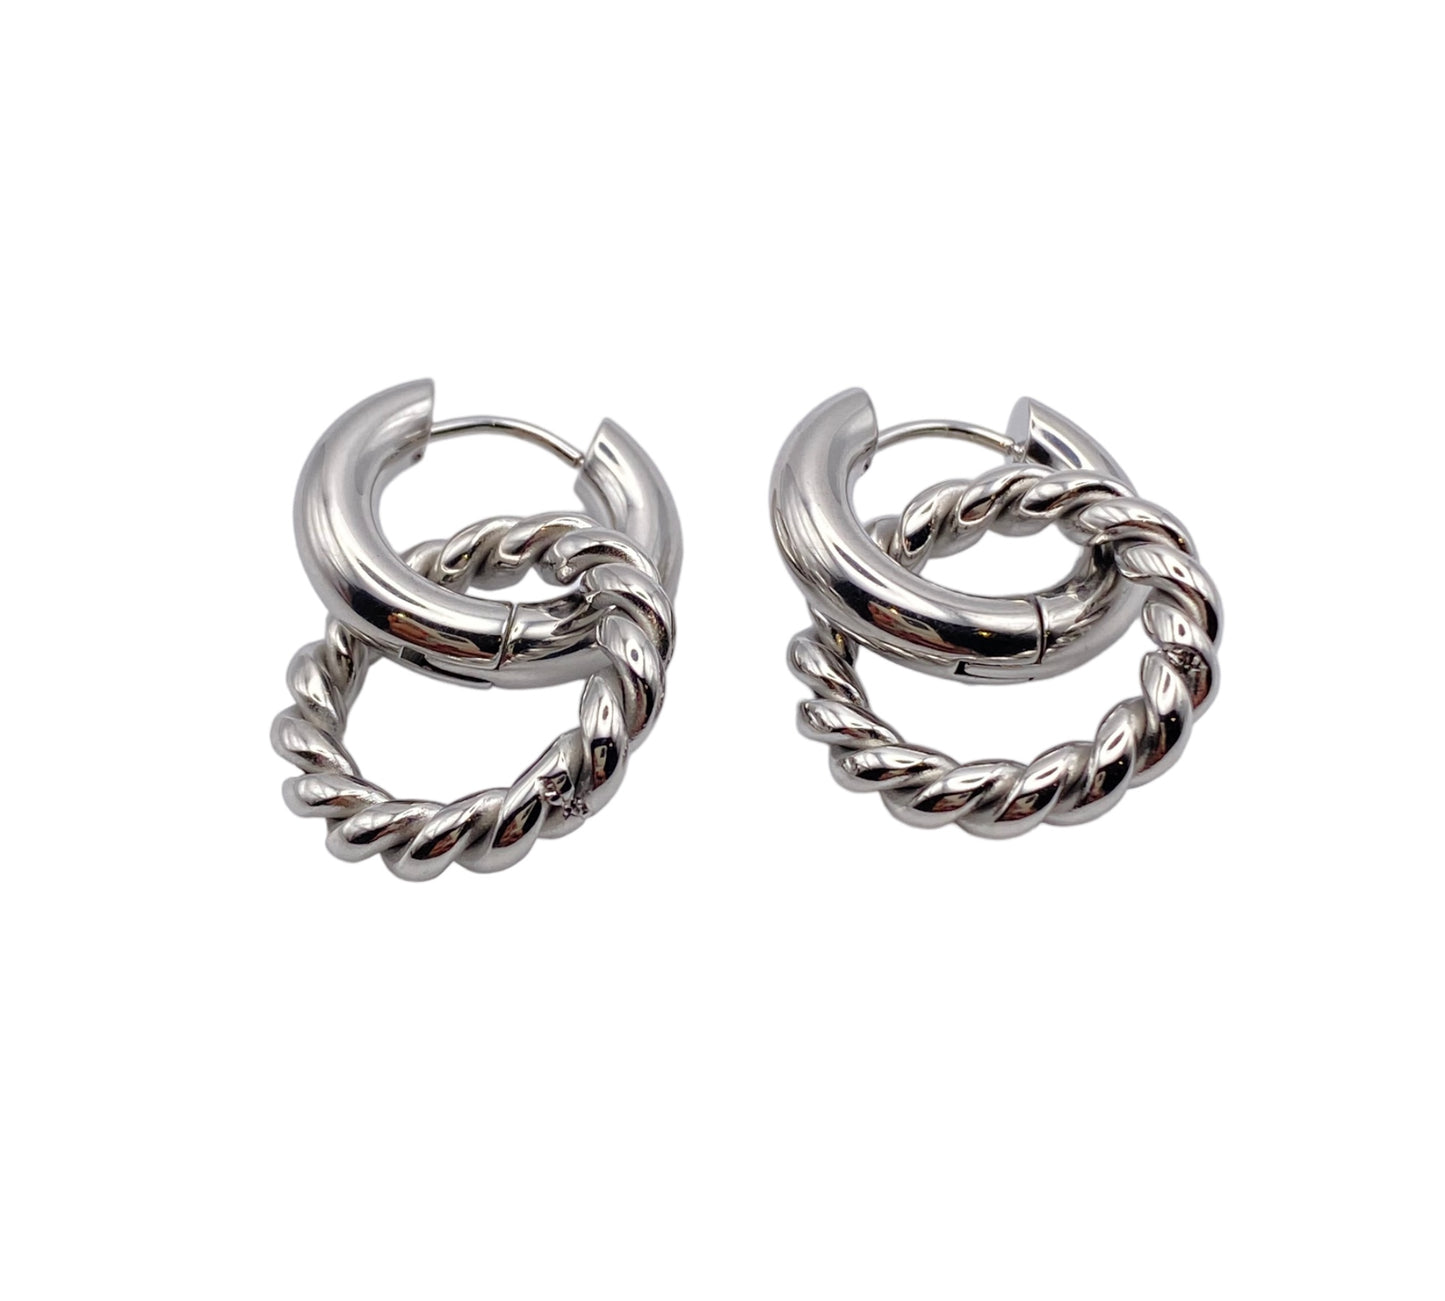 "WHISPER" silver colored hoops with a dangling round charm